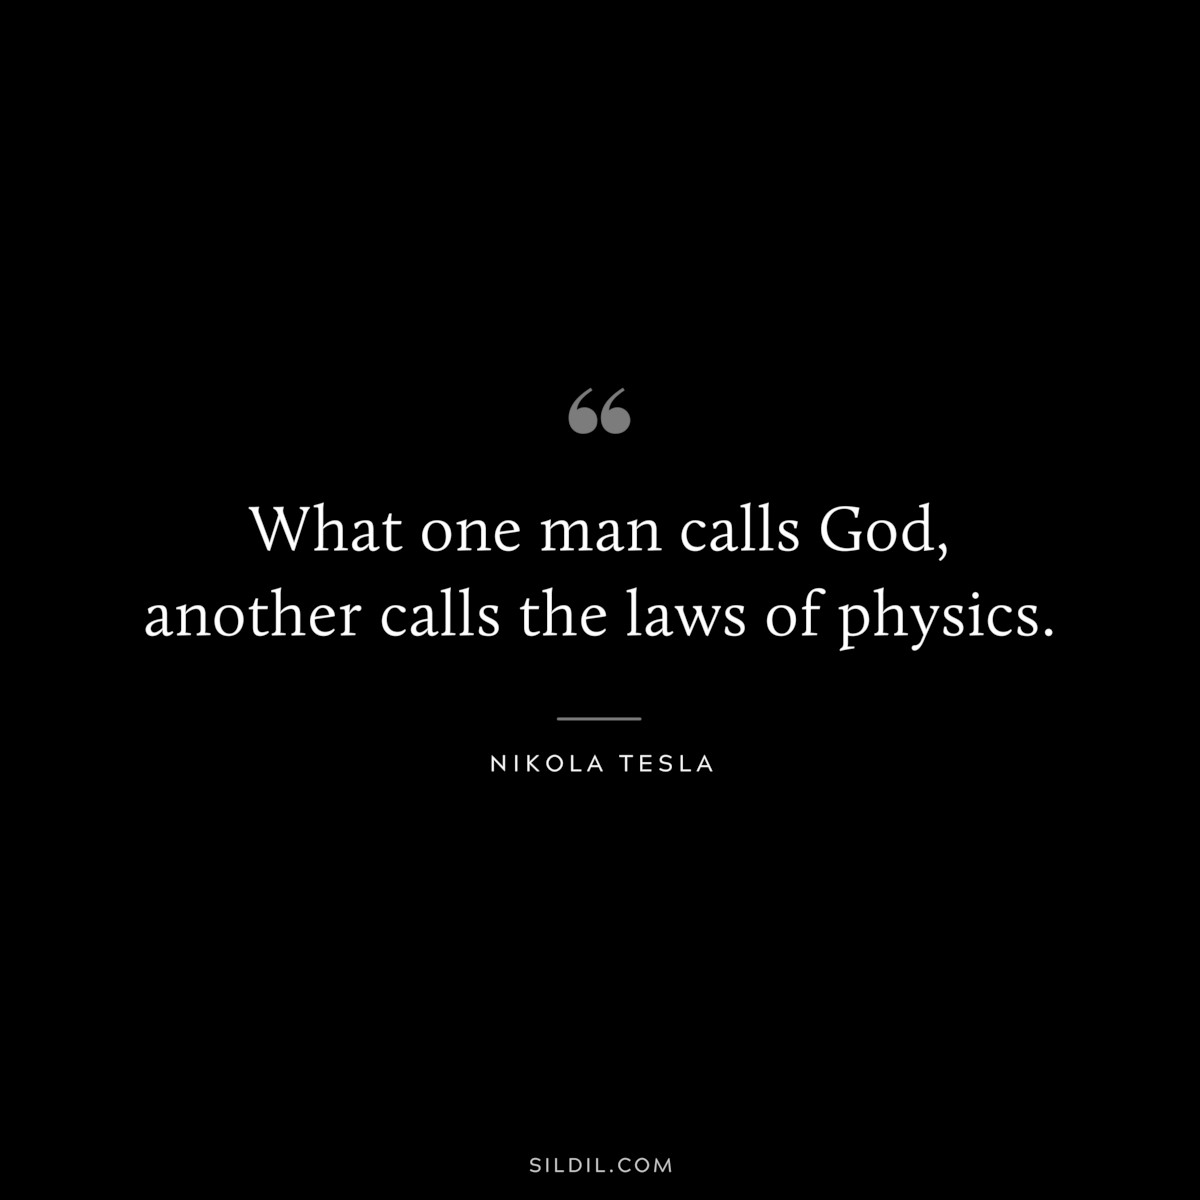 What one man calls God, another calls the laws of physics. ― Nikola Tesla